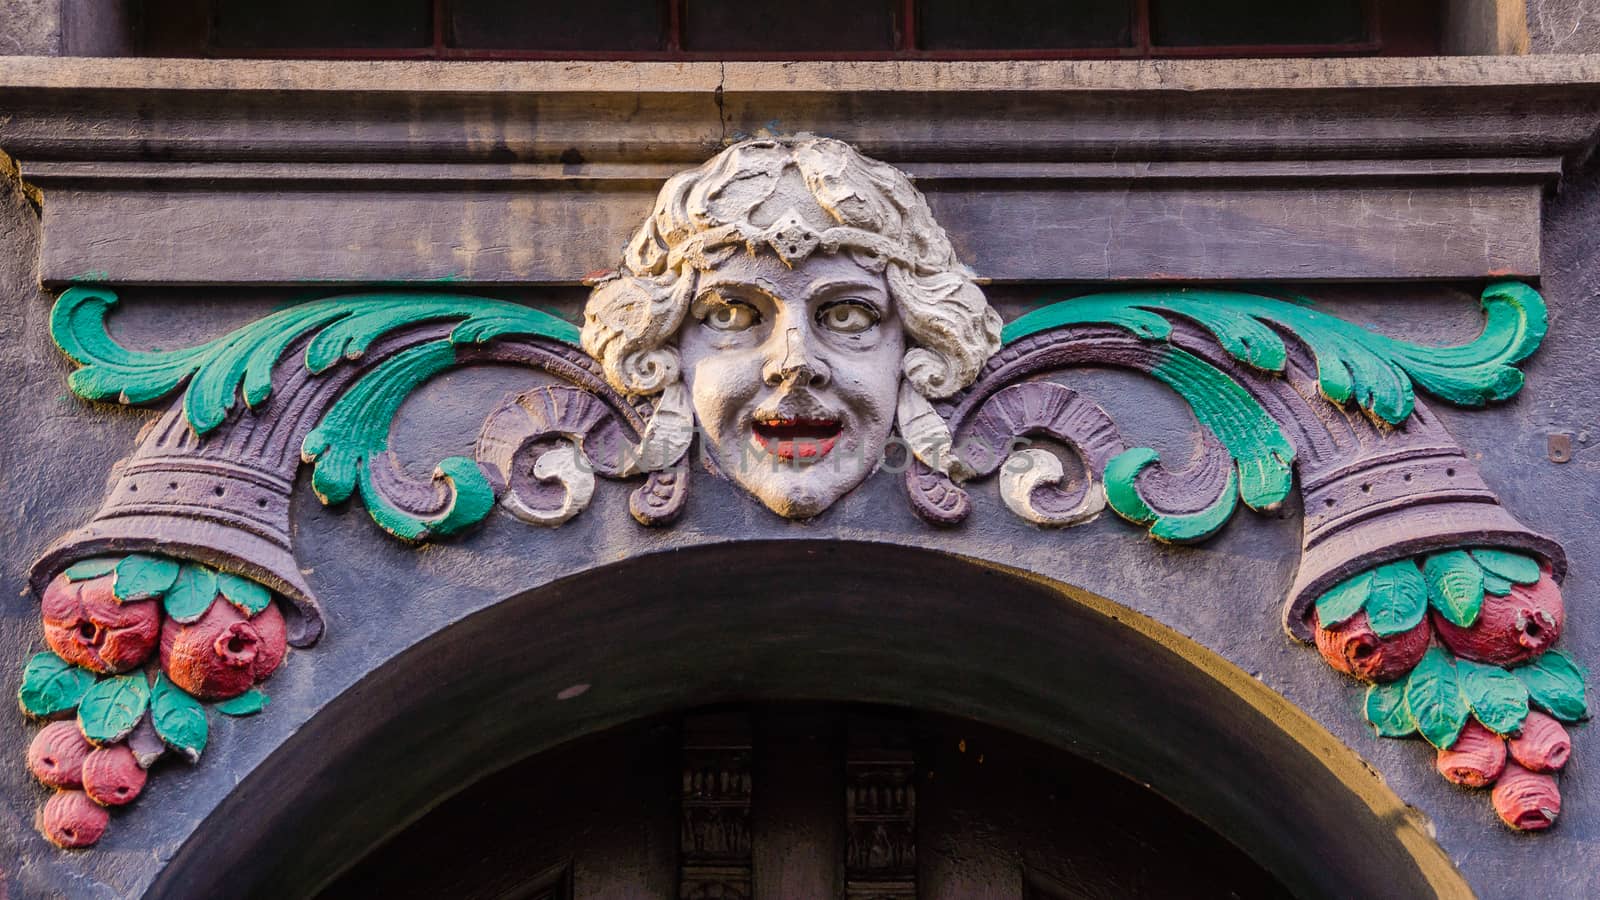 Architectural decoration over the door of one of the tenements in Gliwice, Silesia region, Poland